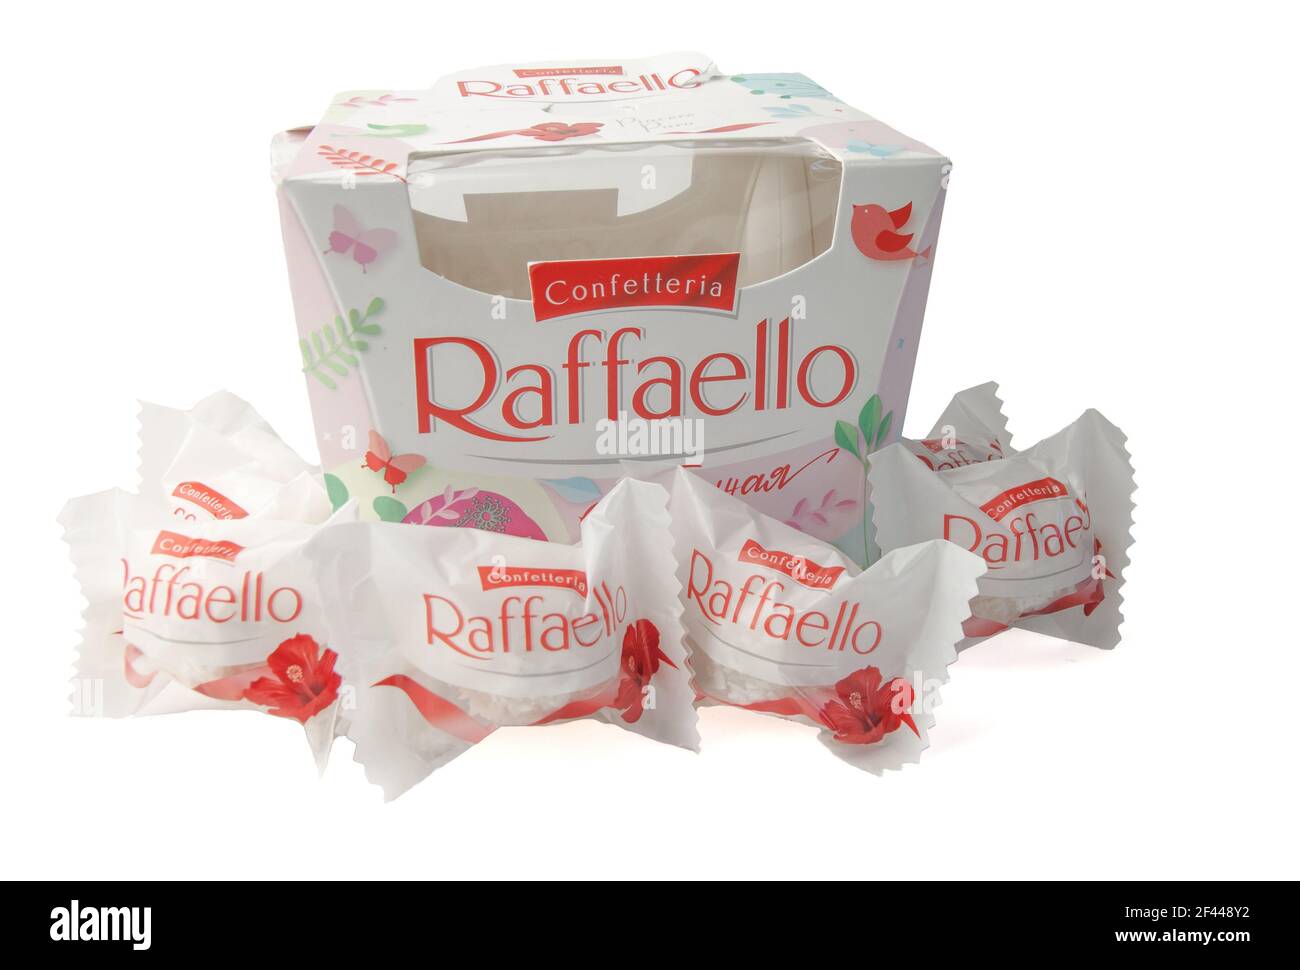 Krasnodar, Russia - March 9, 2021: A box of Raffaello spring collection with candy scattered in front of it in a package isolated on a white backgroun Stock Photo